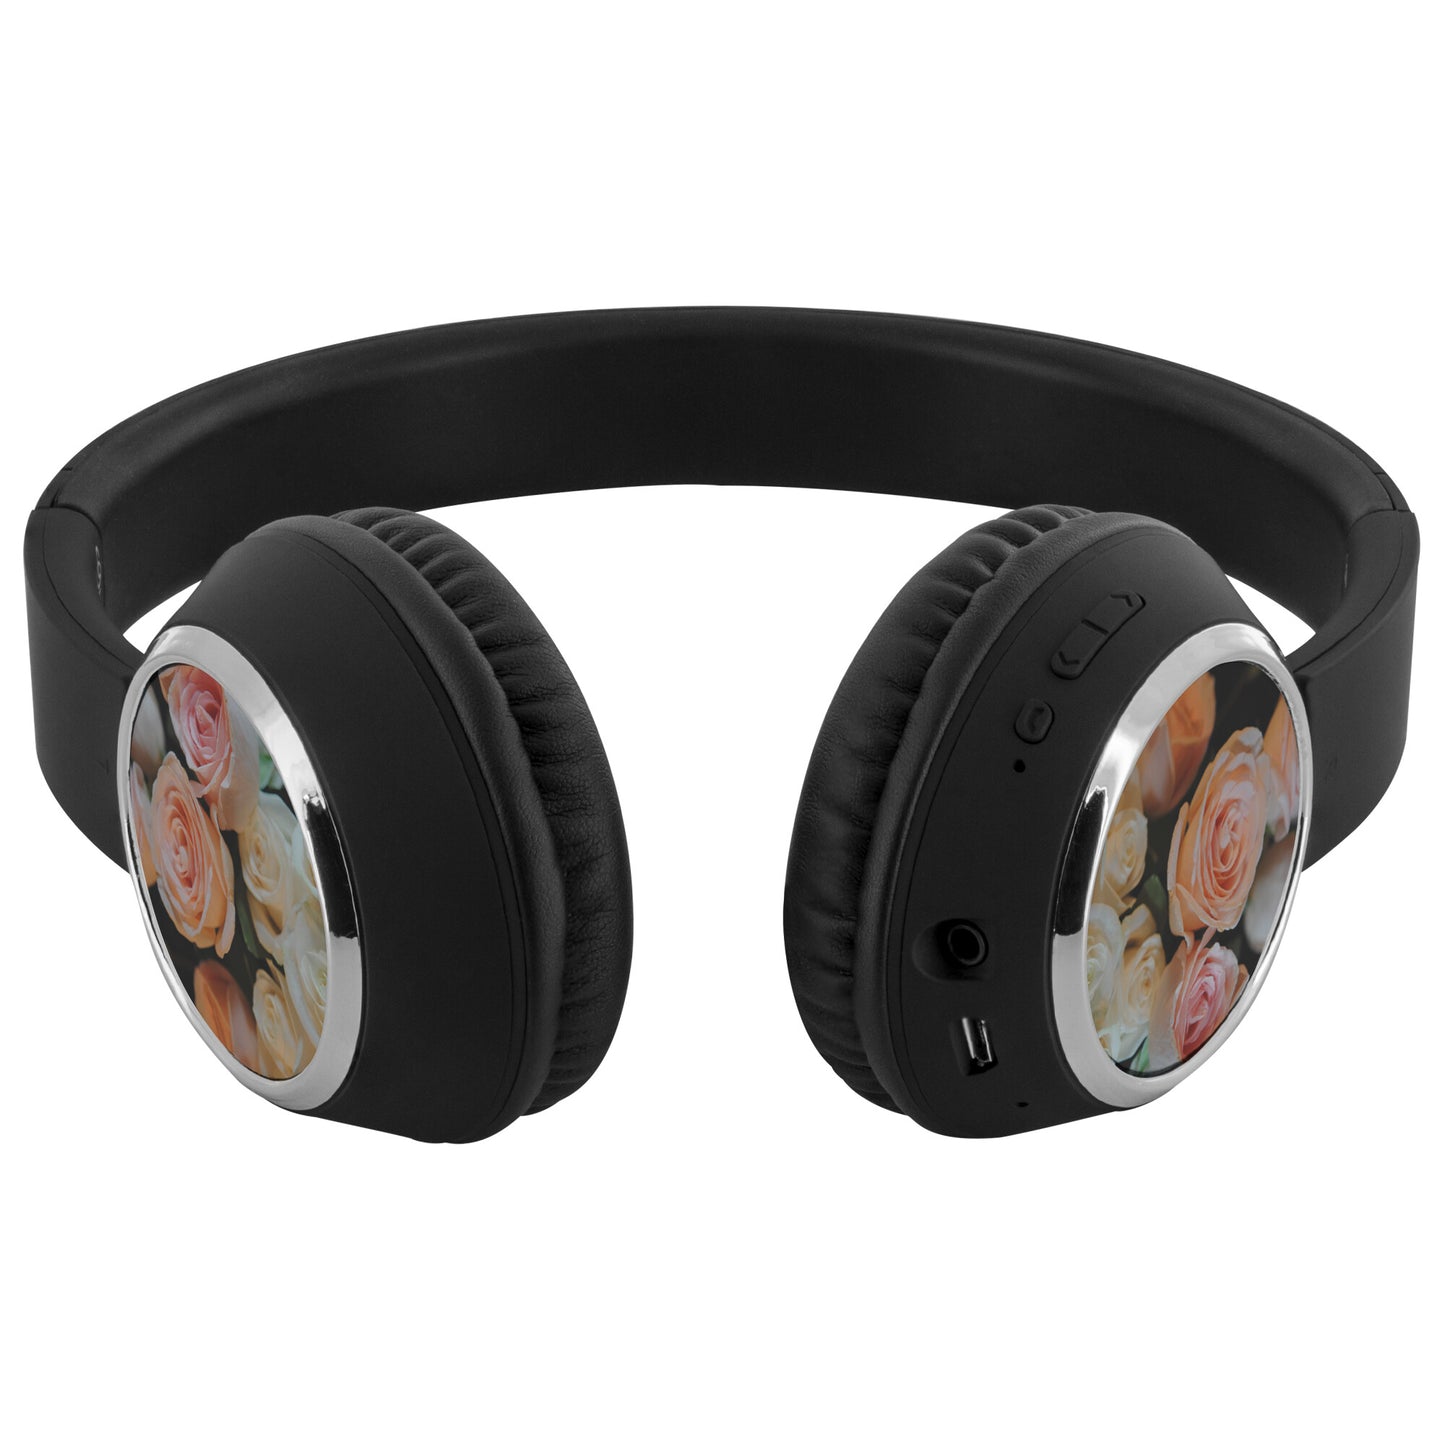 Pink and White Roses 2 Beebop Headphones